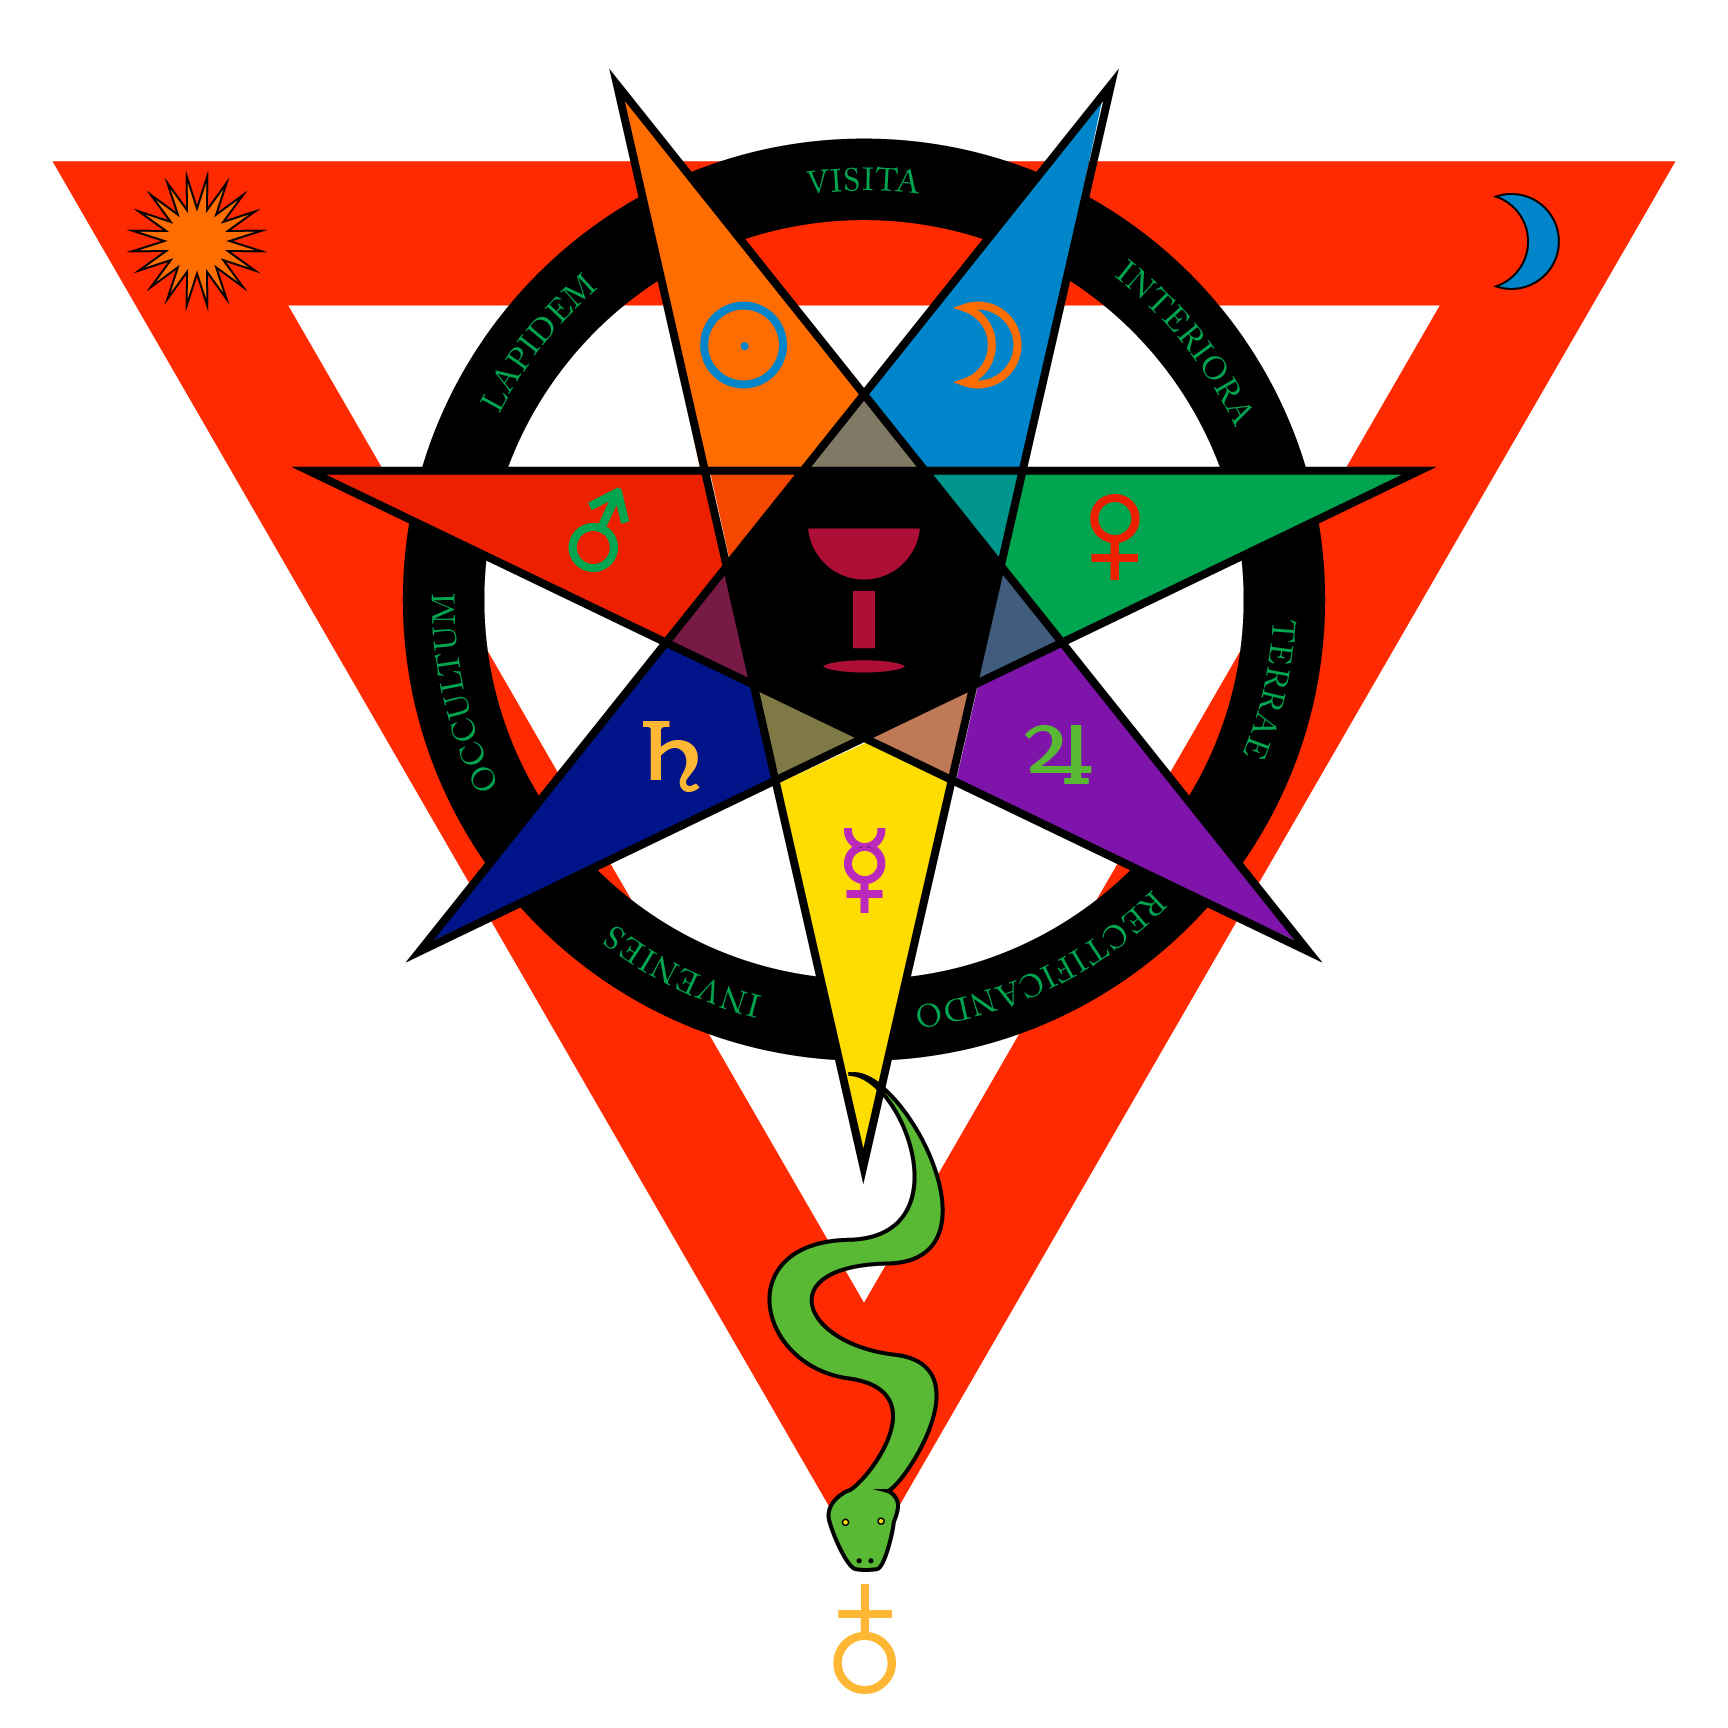 Red downward pointing triangle with sun and moon in upper left and right corners and a serpent descending from the lower point toward the alchemical symbol of antimony or earth. In the triangle is a 7-pointed star, in each section of which is a planetary symbol. In the center is the grail. Around the whole is a circle on which are the words VISITA INTERIORA TERRAE RECTIFICANDO INVENIES OCCULTUM LAPIDEM.